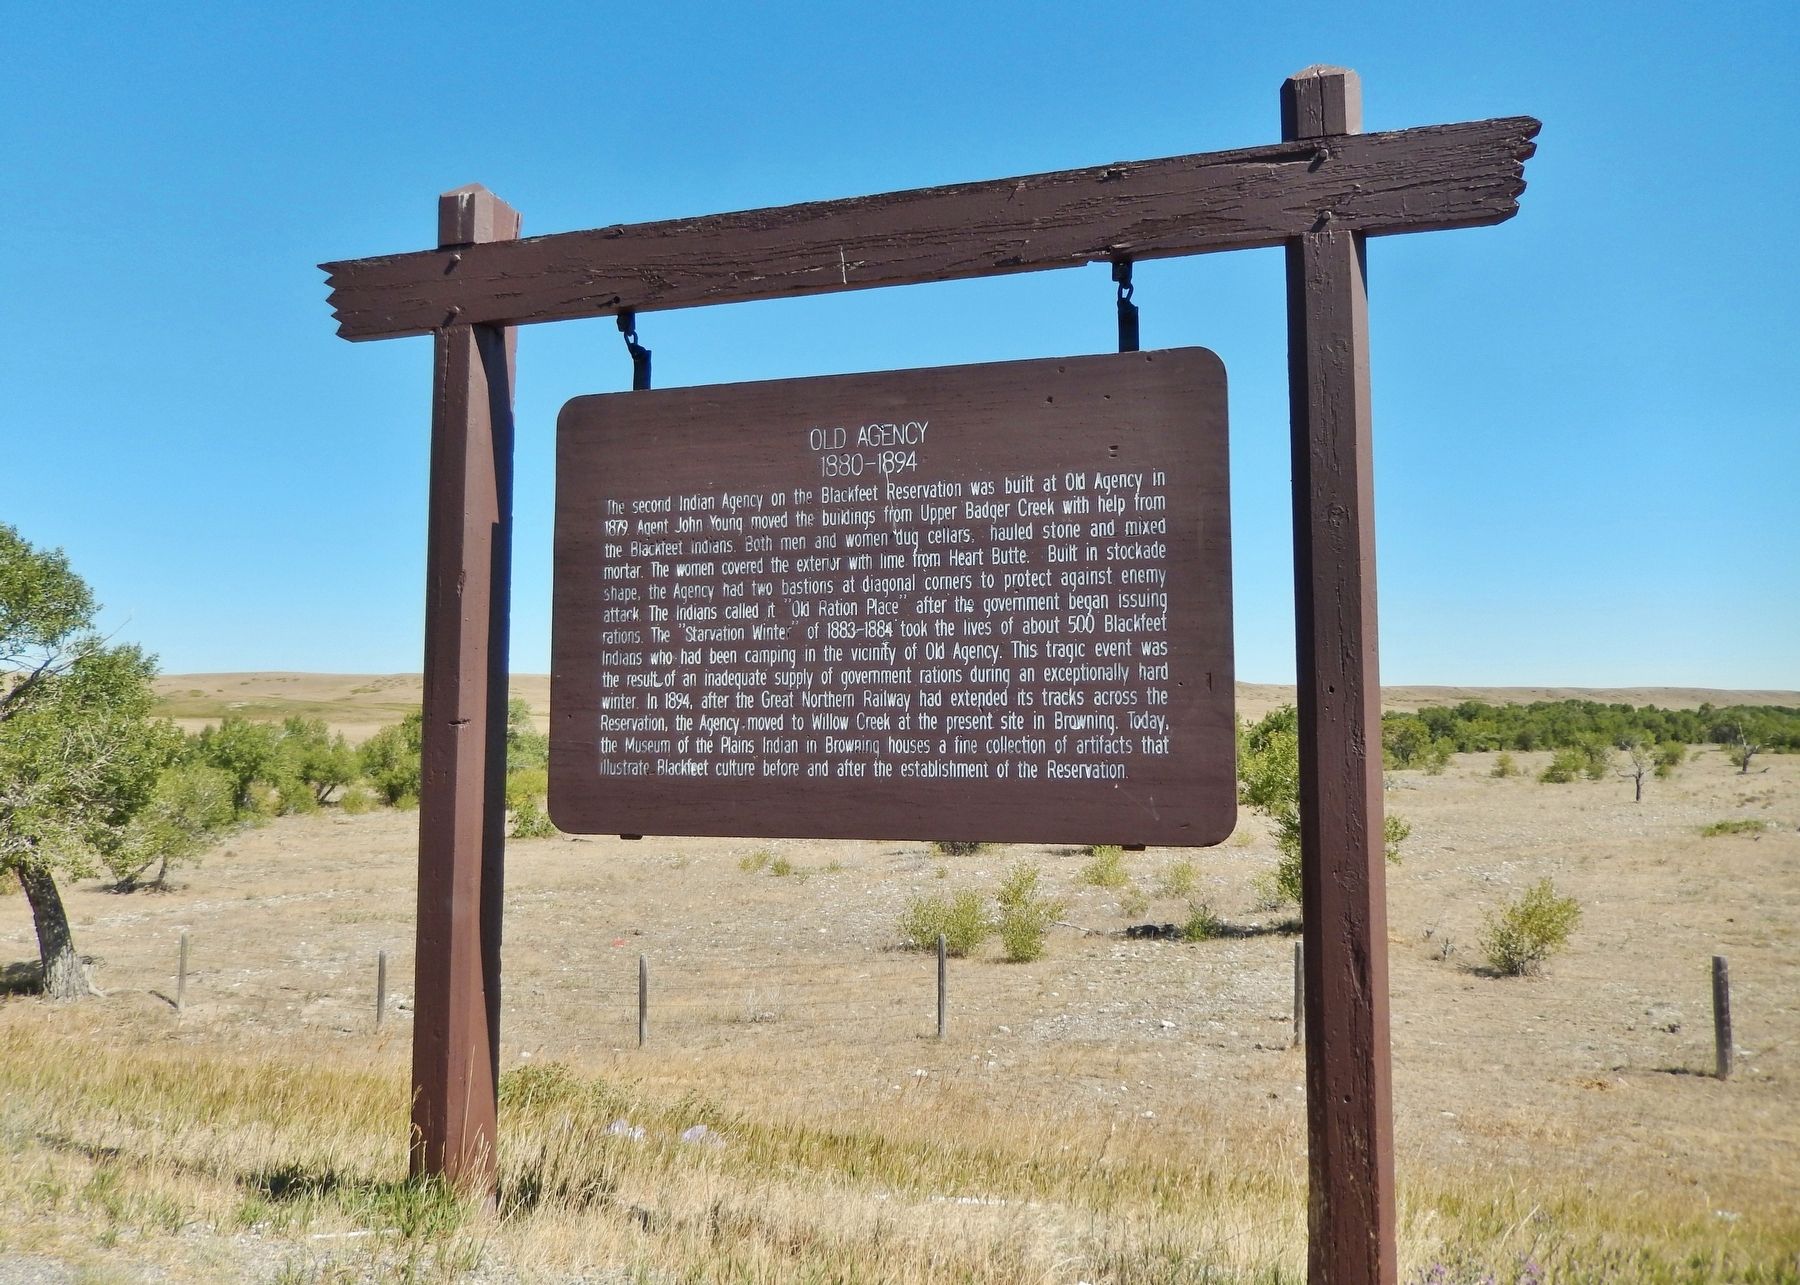 Old Agency Marker (<i>wide view</i>) image, Touch for more information